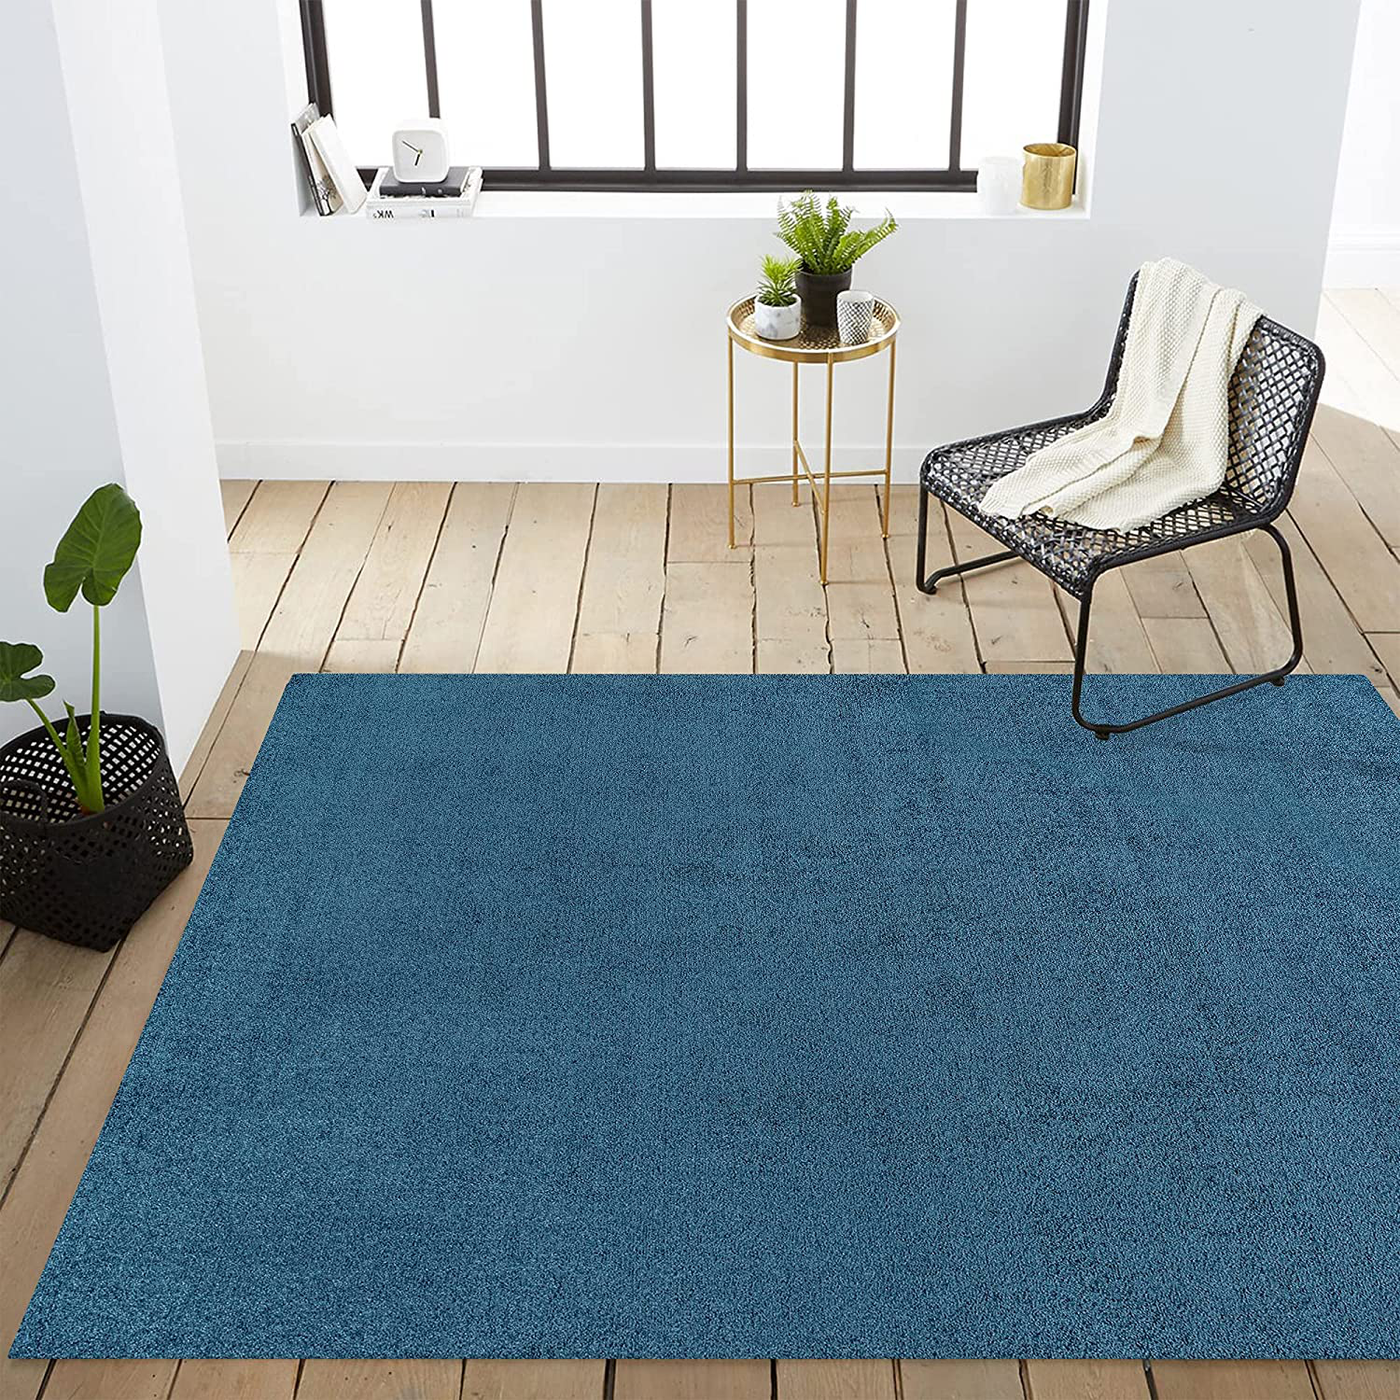 JONATHAN Y Haze Solid Low-Pile Classic Blue 3 ft. x 5 ft. Area Rug, Casual,Contemporary,Solid,Traditional,EasyCleaning,Bedroom,LivingRoom, Non Shedding